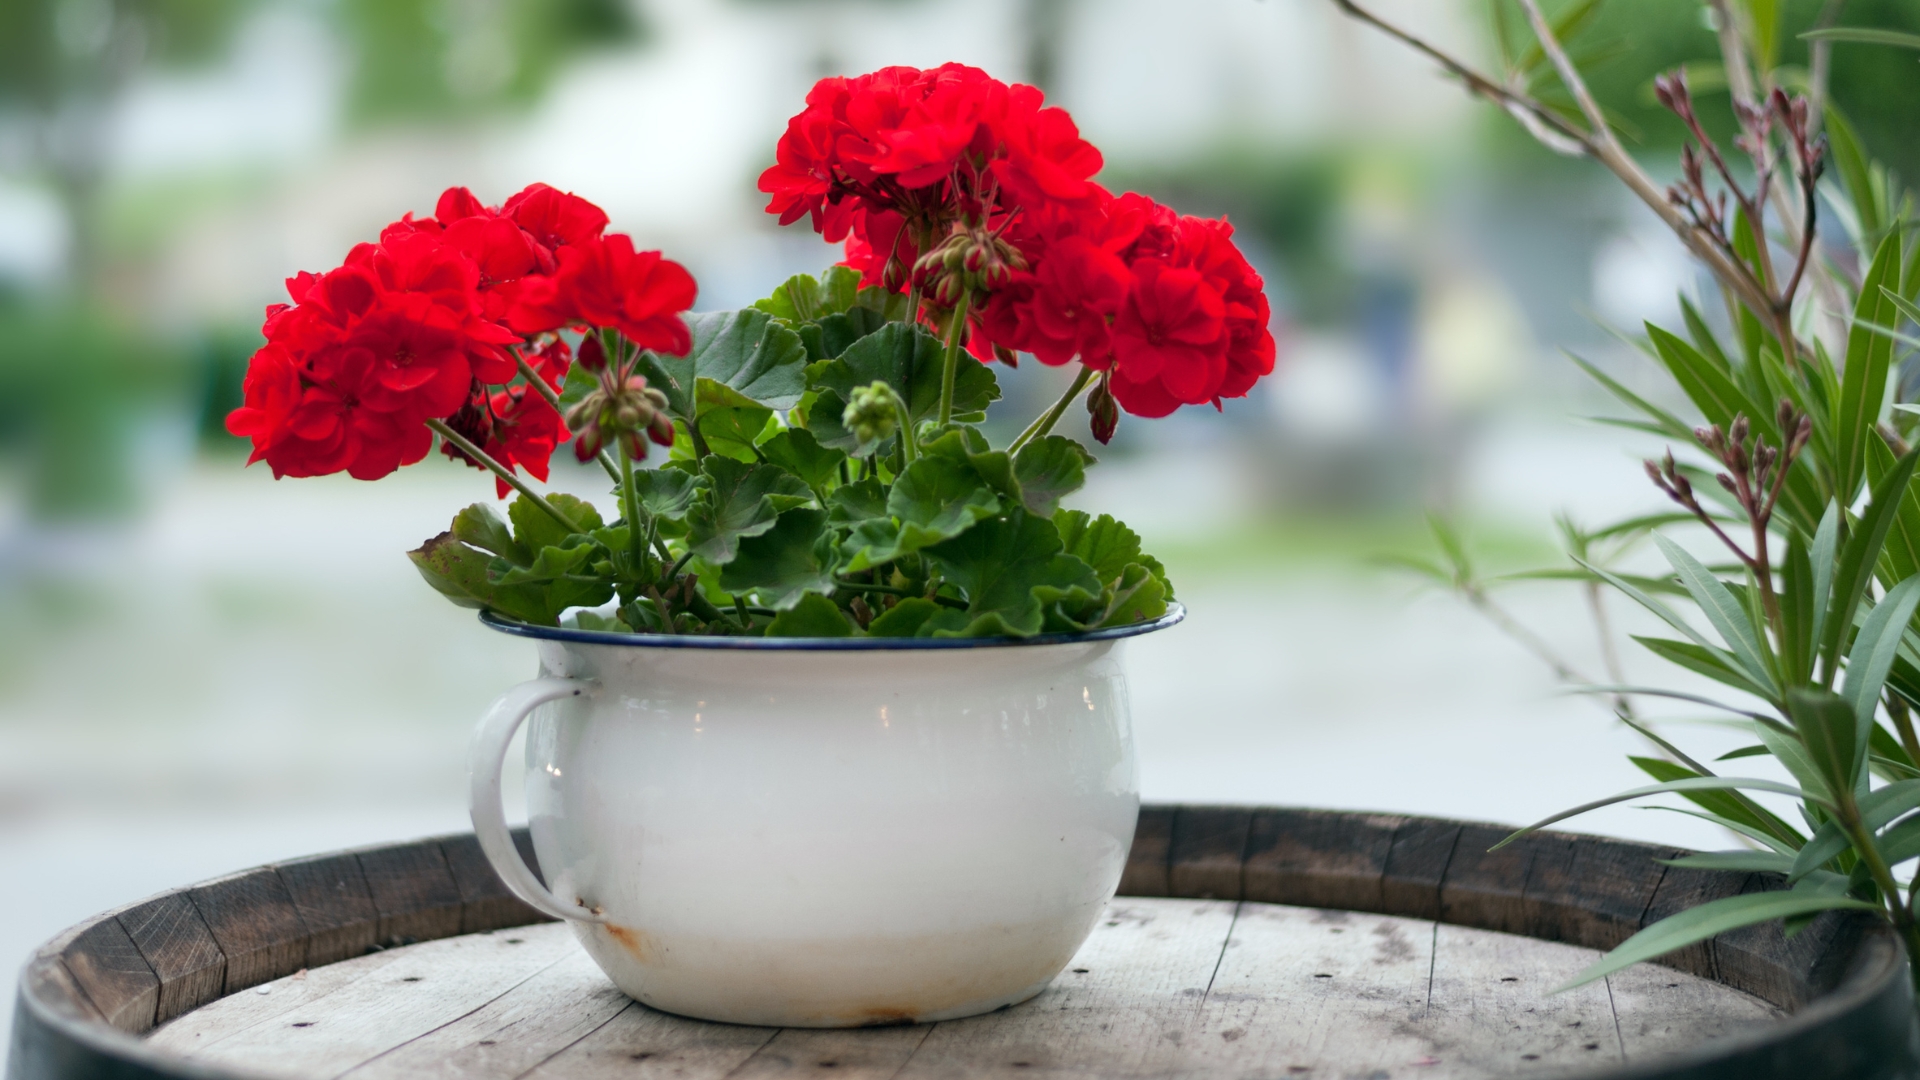 6 Tips For Growing Geraniums In Pots If You’re Short On Space